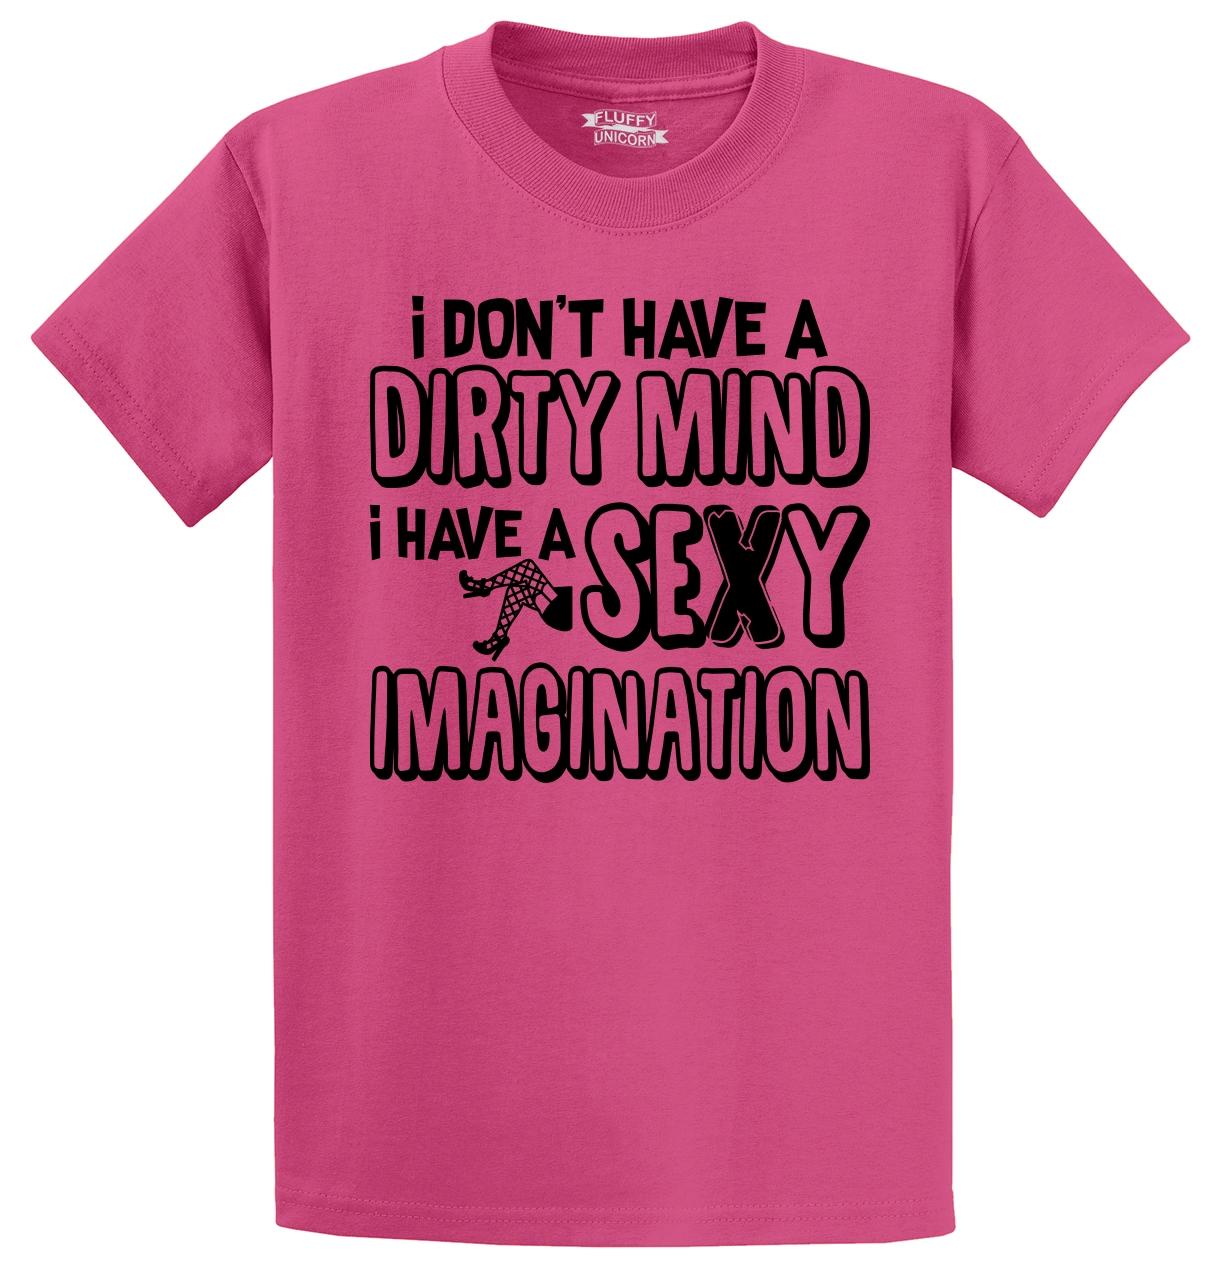 Dirty Mind Sexy Imagination Funny T Shirt Adult Humor College Party Tee